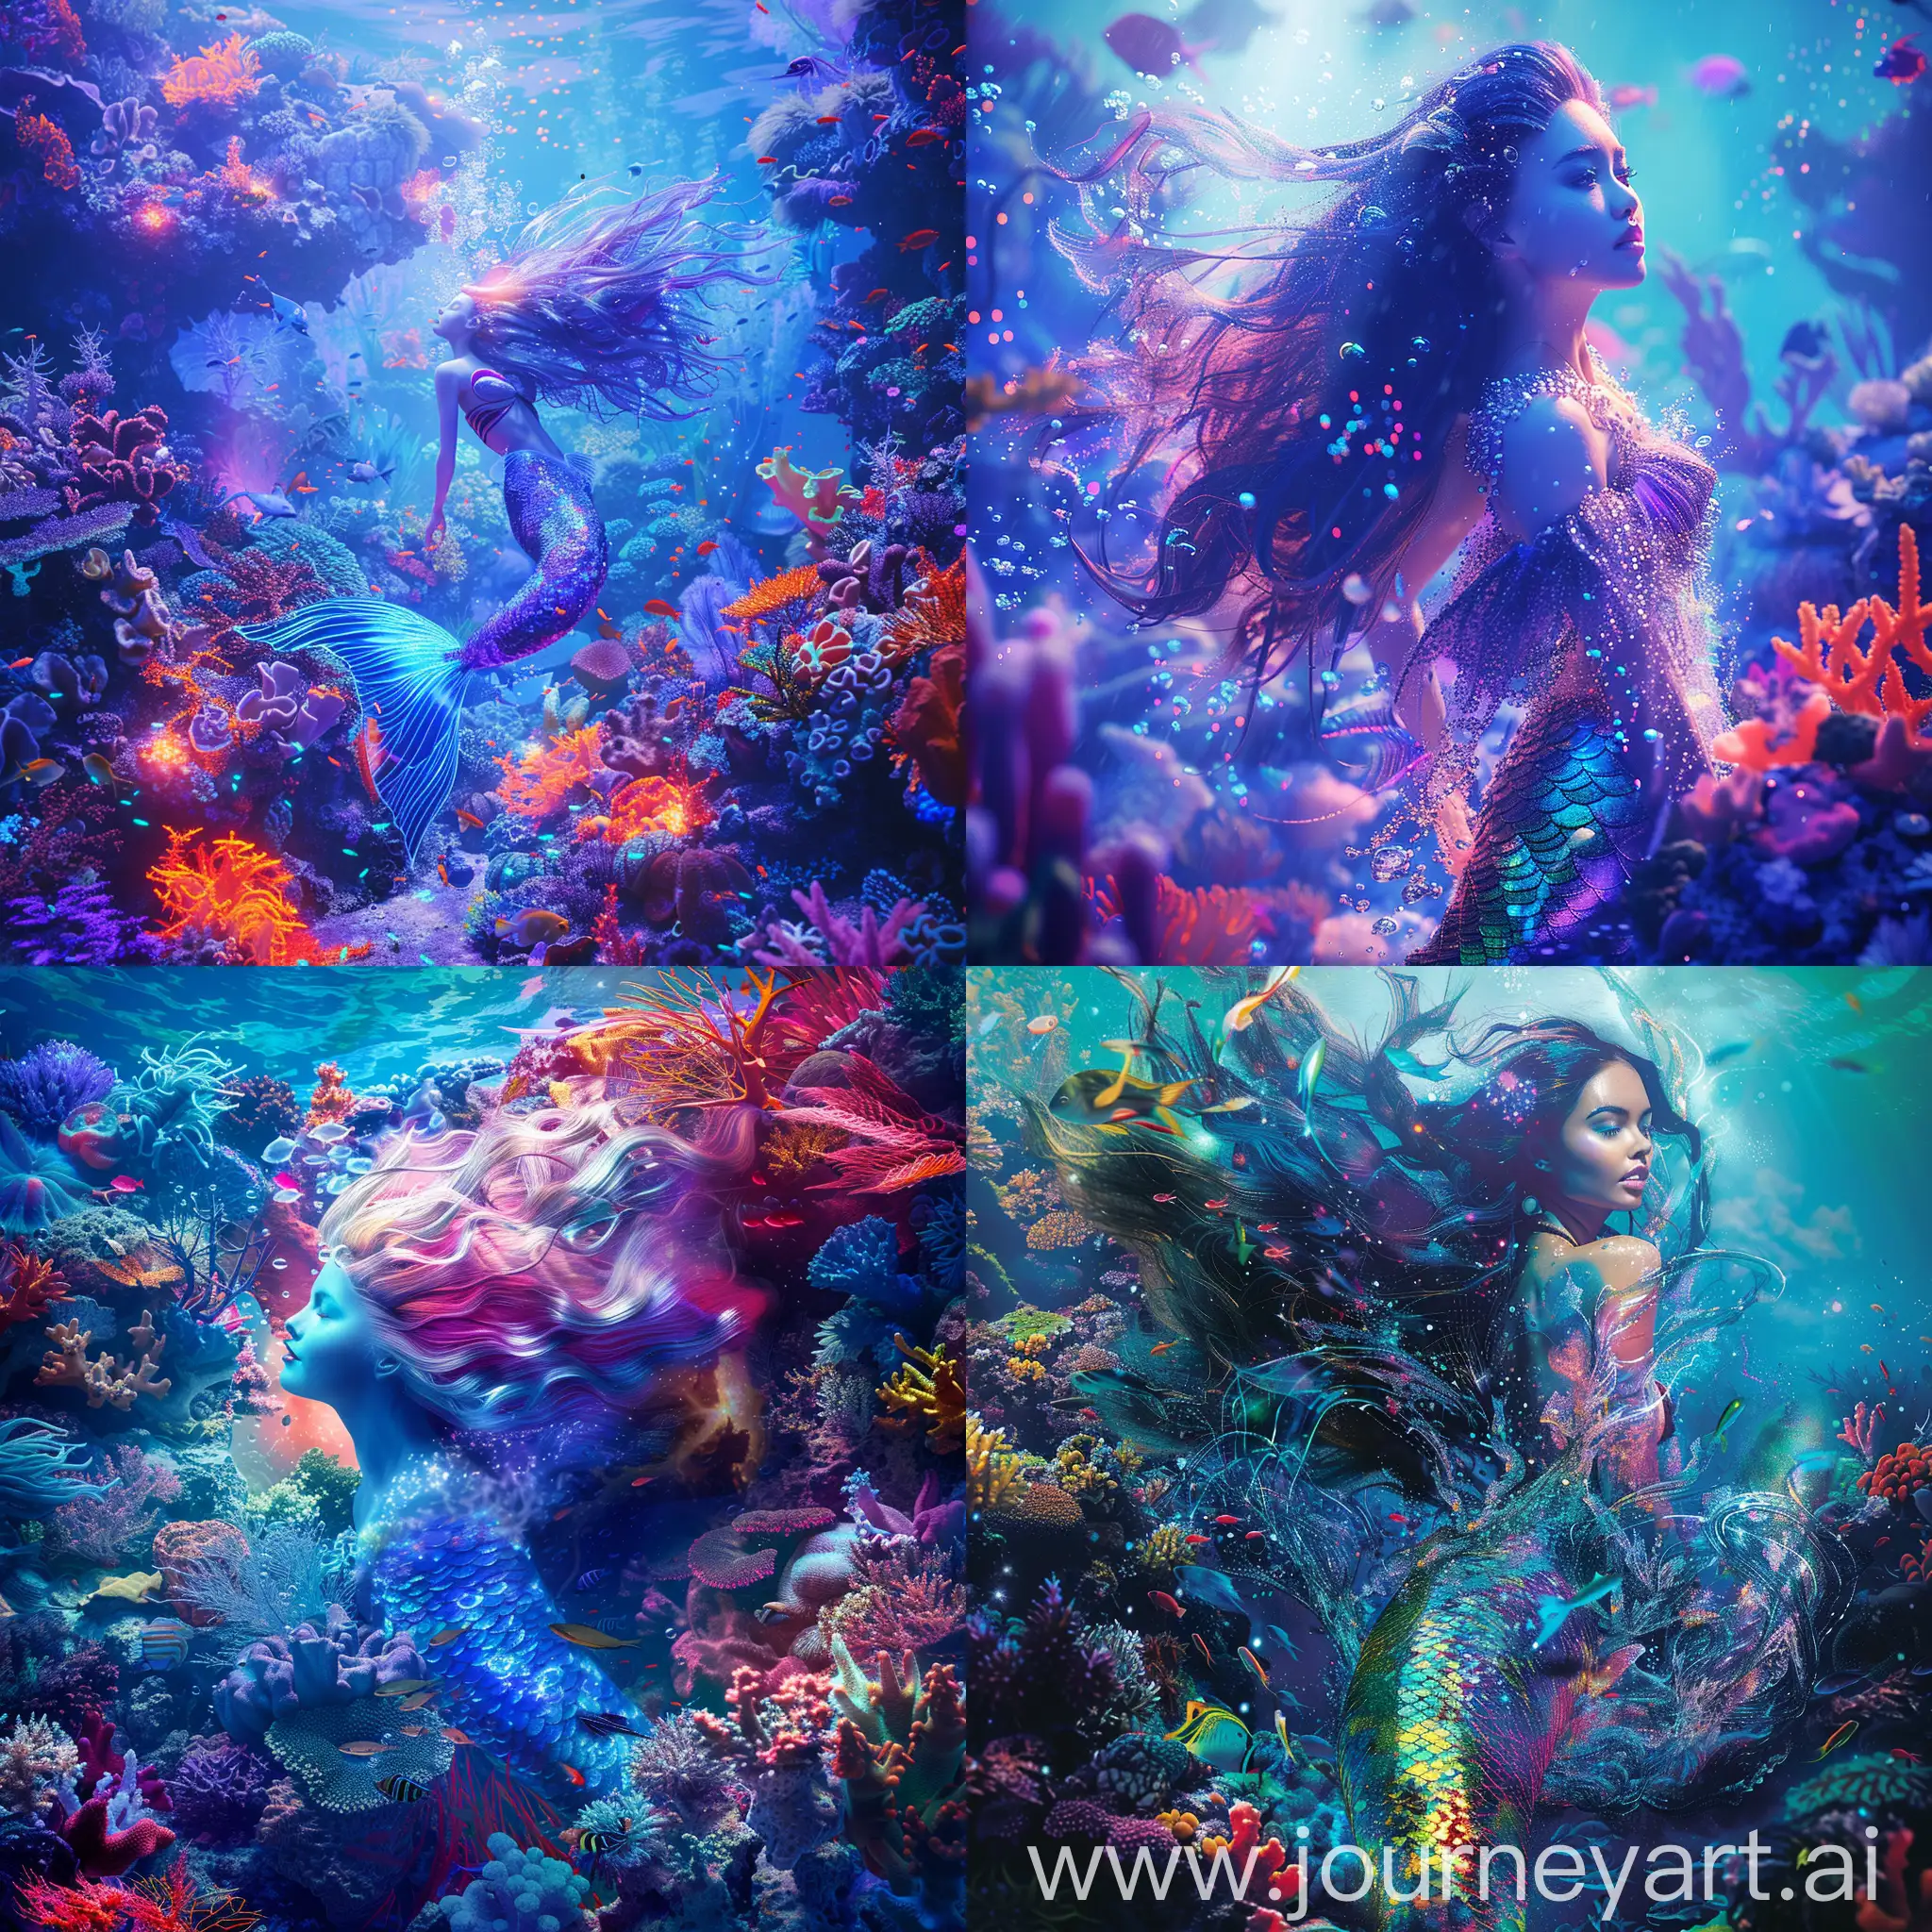 Enchanting-Underwater-Portrait-of-a-Hot-Mermaid-amidst-Colorful-Coral-Reefs-and-Exotic-Sea-Creatures